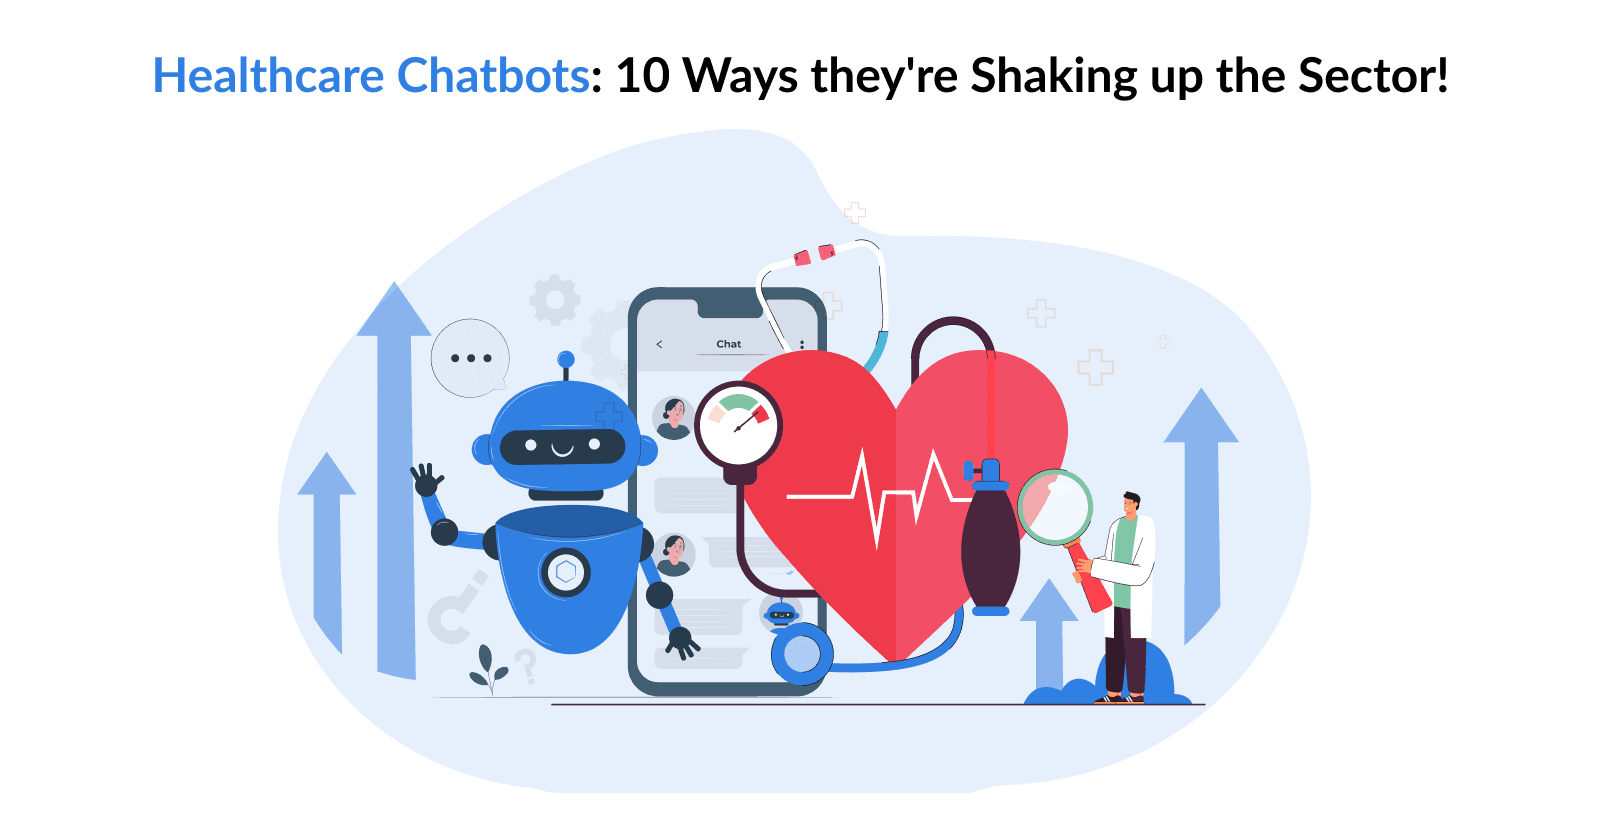 Healthcare Chatbots: 10 ways they're shaking up the sector!